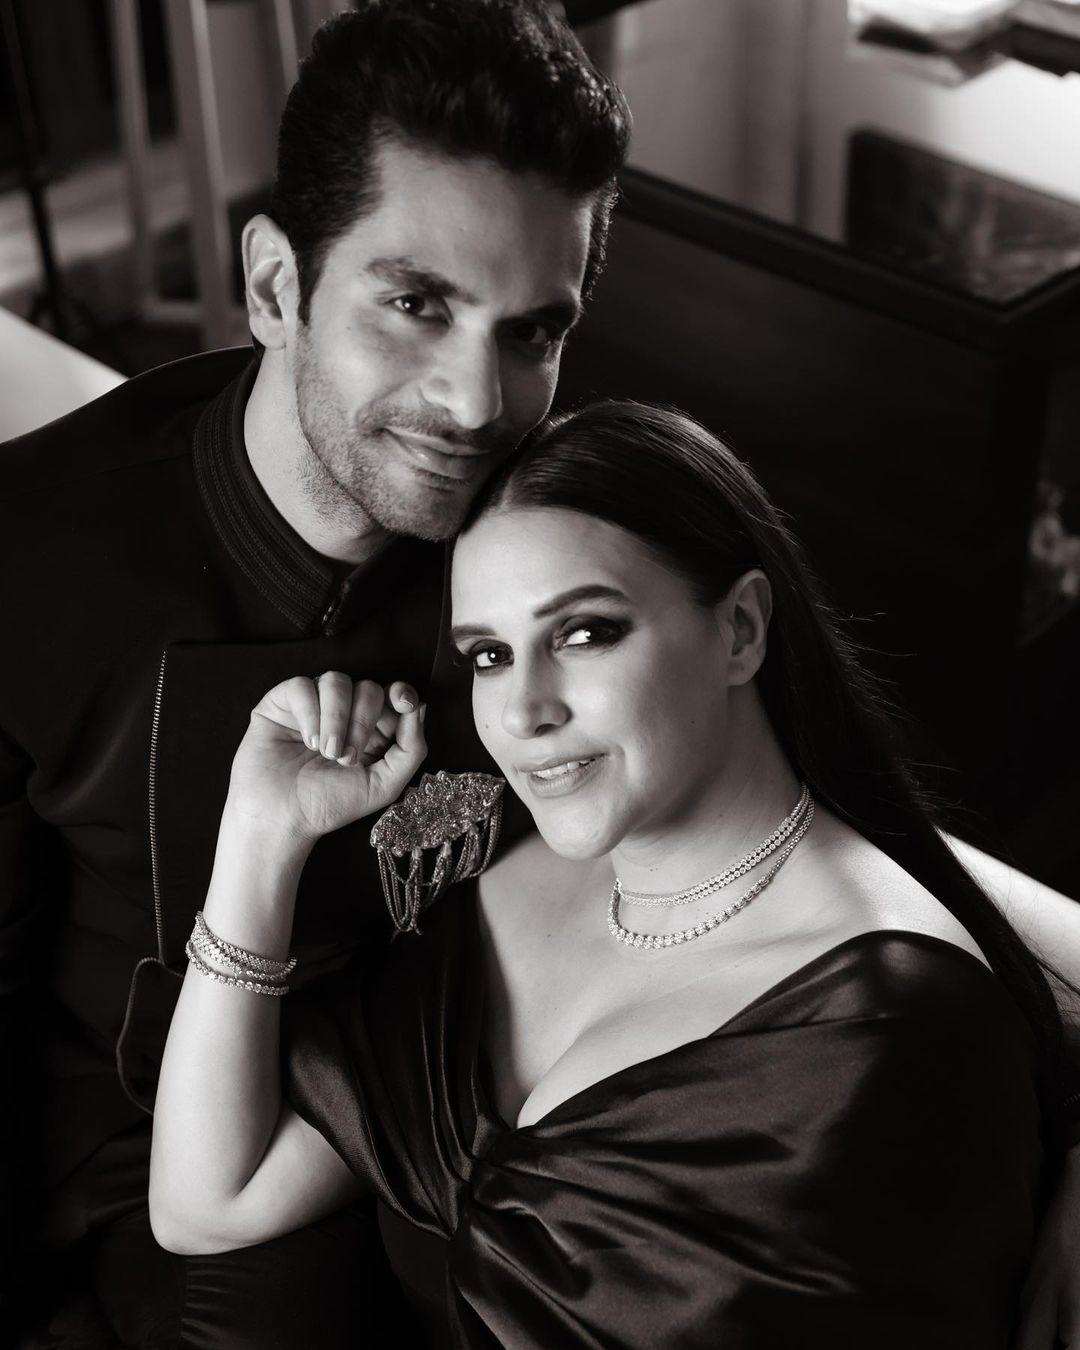 Angad Bedi's proposal to Neha Dhupia defied convention, embodying the kind of moment that would warm any parent's heart. Recounting the experience, Dhupia shared how she informed Bedi about a role during a Punjab shoot. He disregarded the details, prioritizing time with her and promptly flying down. After the shoot, he surprised her at her parents' doorstep with a marriage proposal she hadn't anticipated.